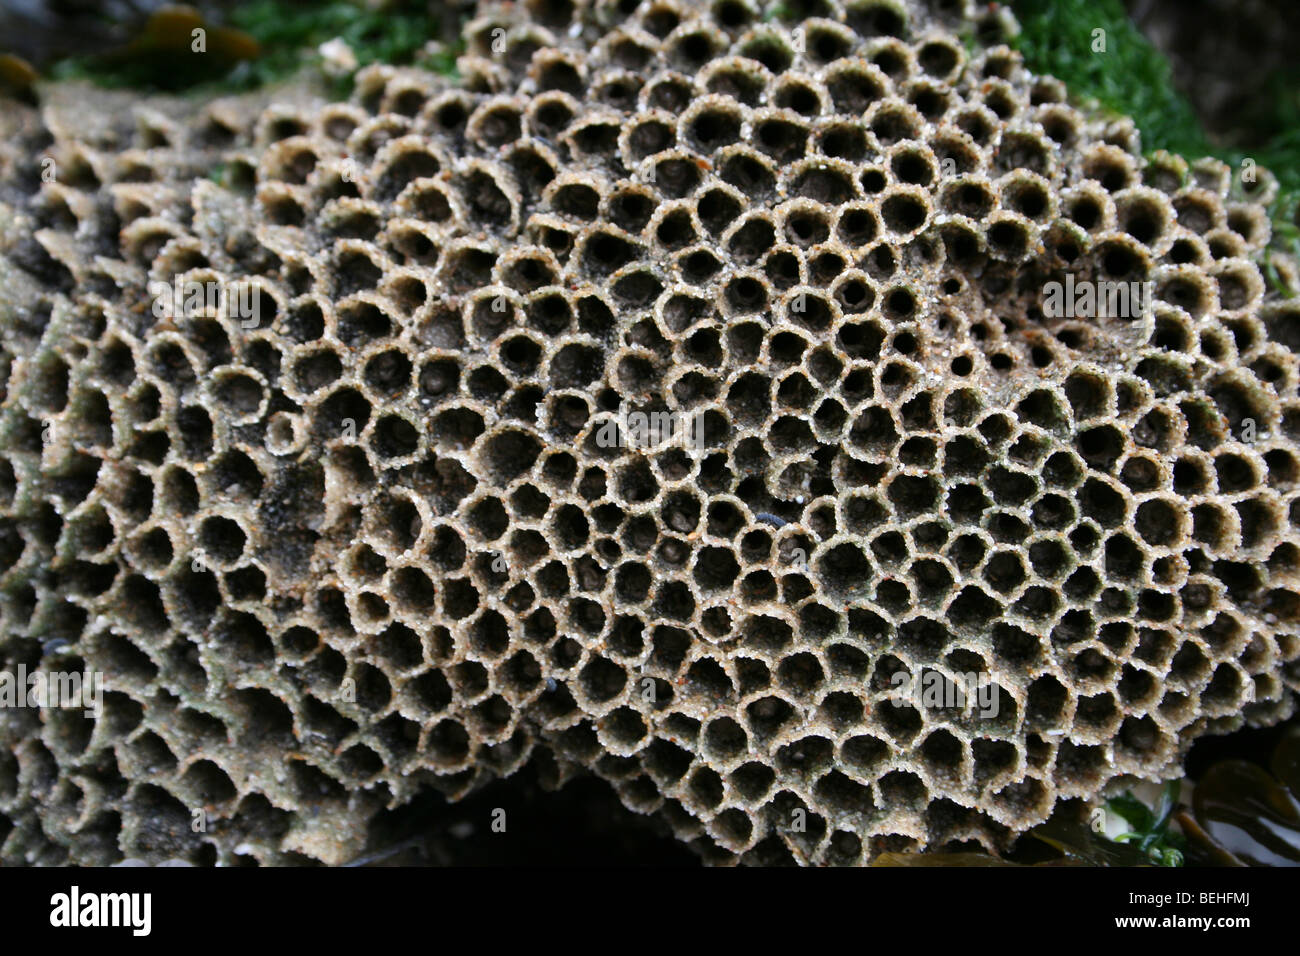 Close Up Of Reef Colony Of The Honeycomb Worm Sabellaria alveolata At New Brighton, Wallasey, The Wirral, Merseyside, UK Stock Photo